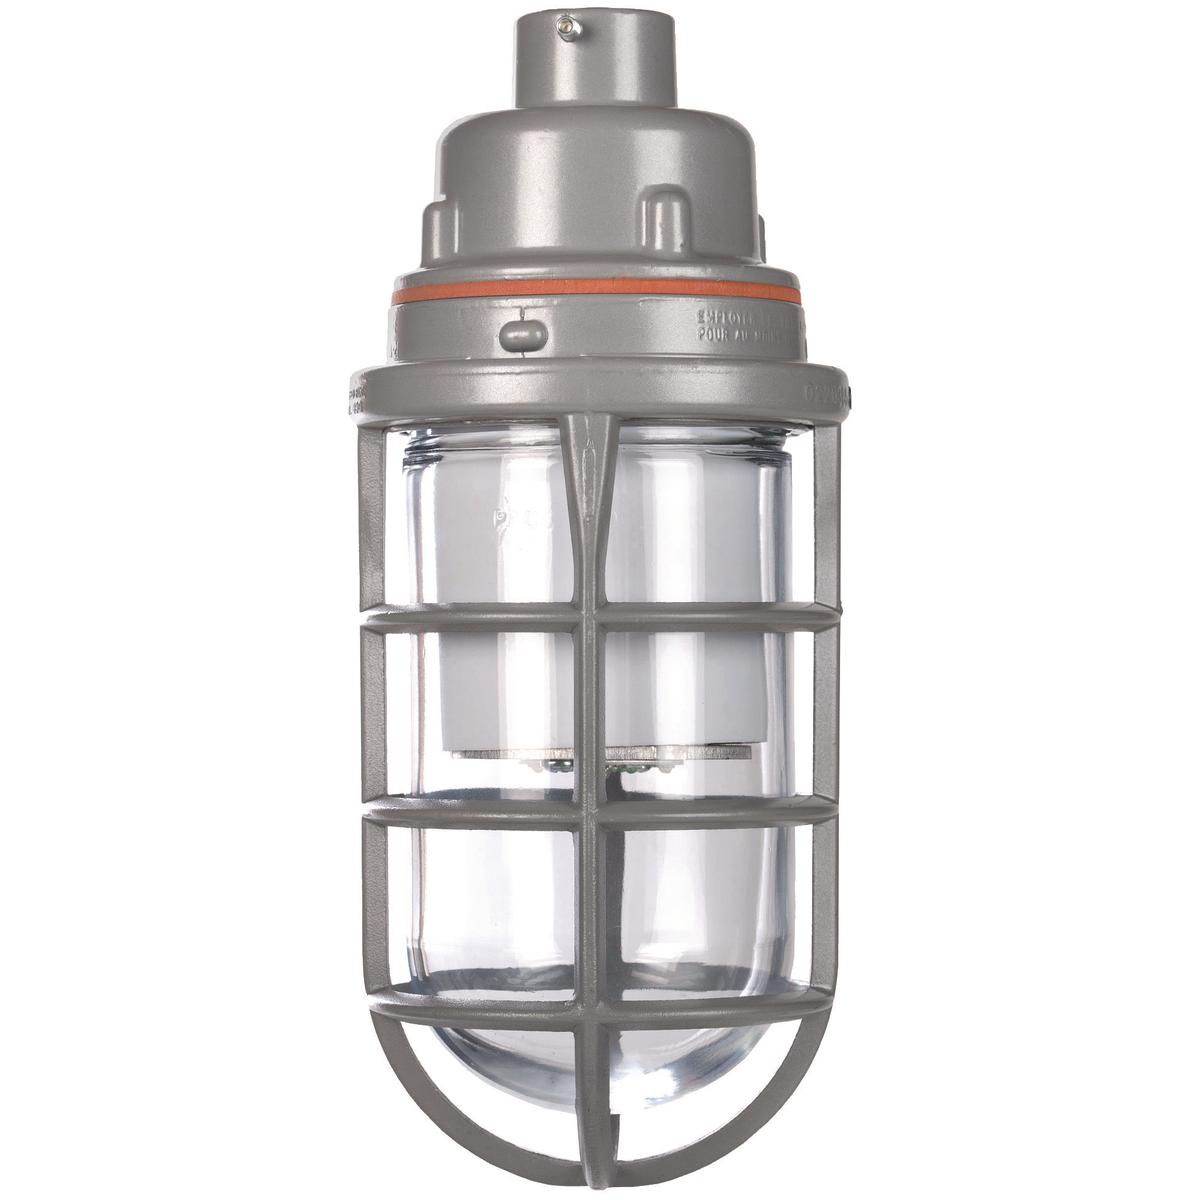 Hubbell VSL1330A1HG The VSL Series is a Vapor Tight/ Utility fixture using energy efficient LED's. This fixture is made with a cast copper-free aluminum housing and mount that is  suitable for harsh and hazardous environments. With the design of this fixtures internal heat s